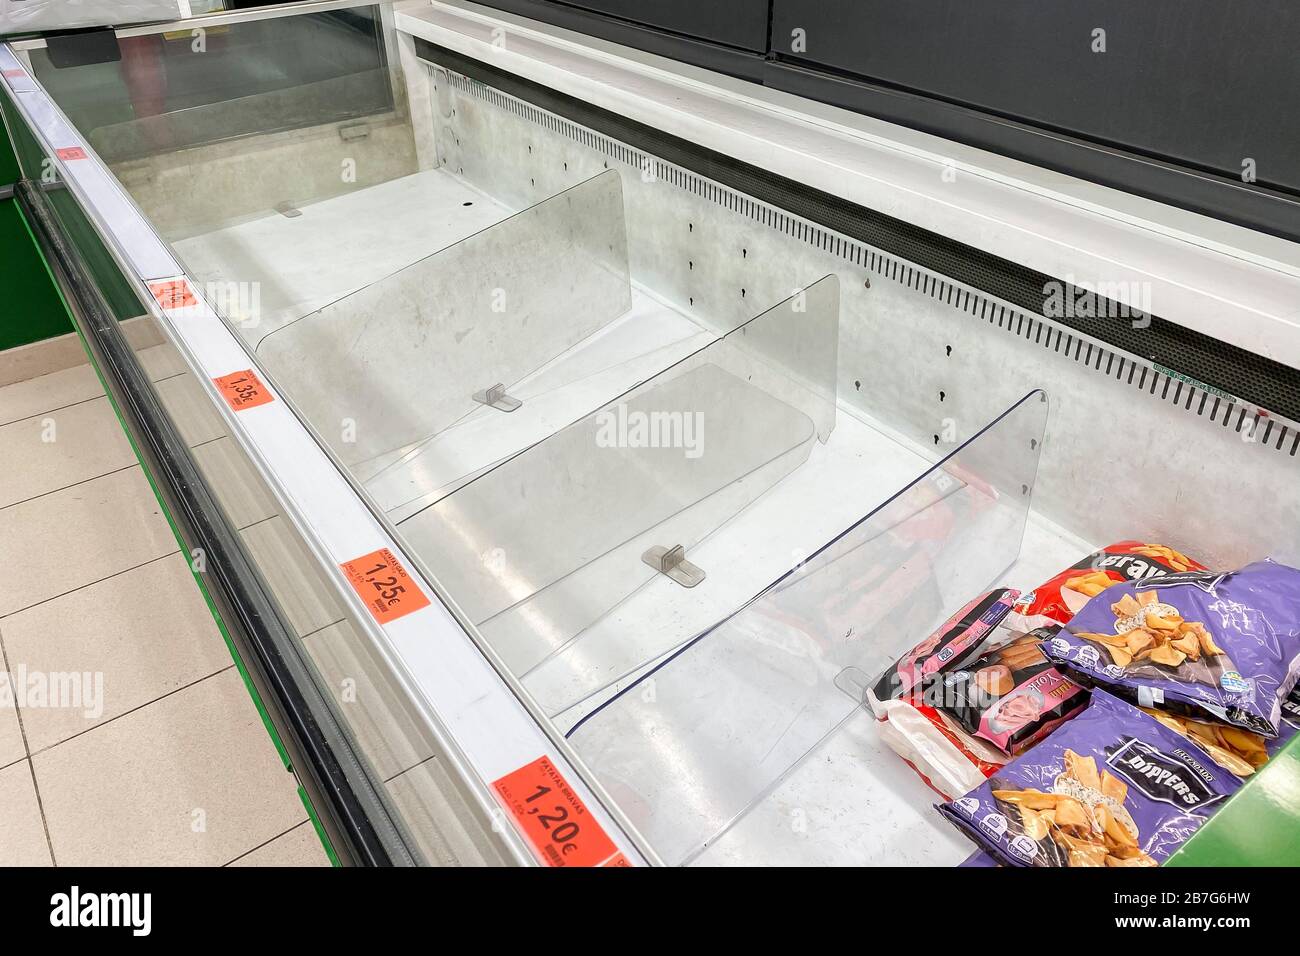 Panic buying results in bare supermarket shelves on the Spanish Island of Mallorca (Majorca) as the country prepares for total lock down as a result of Covid-19. Stock Photo